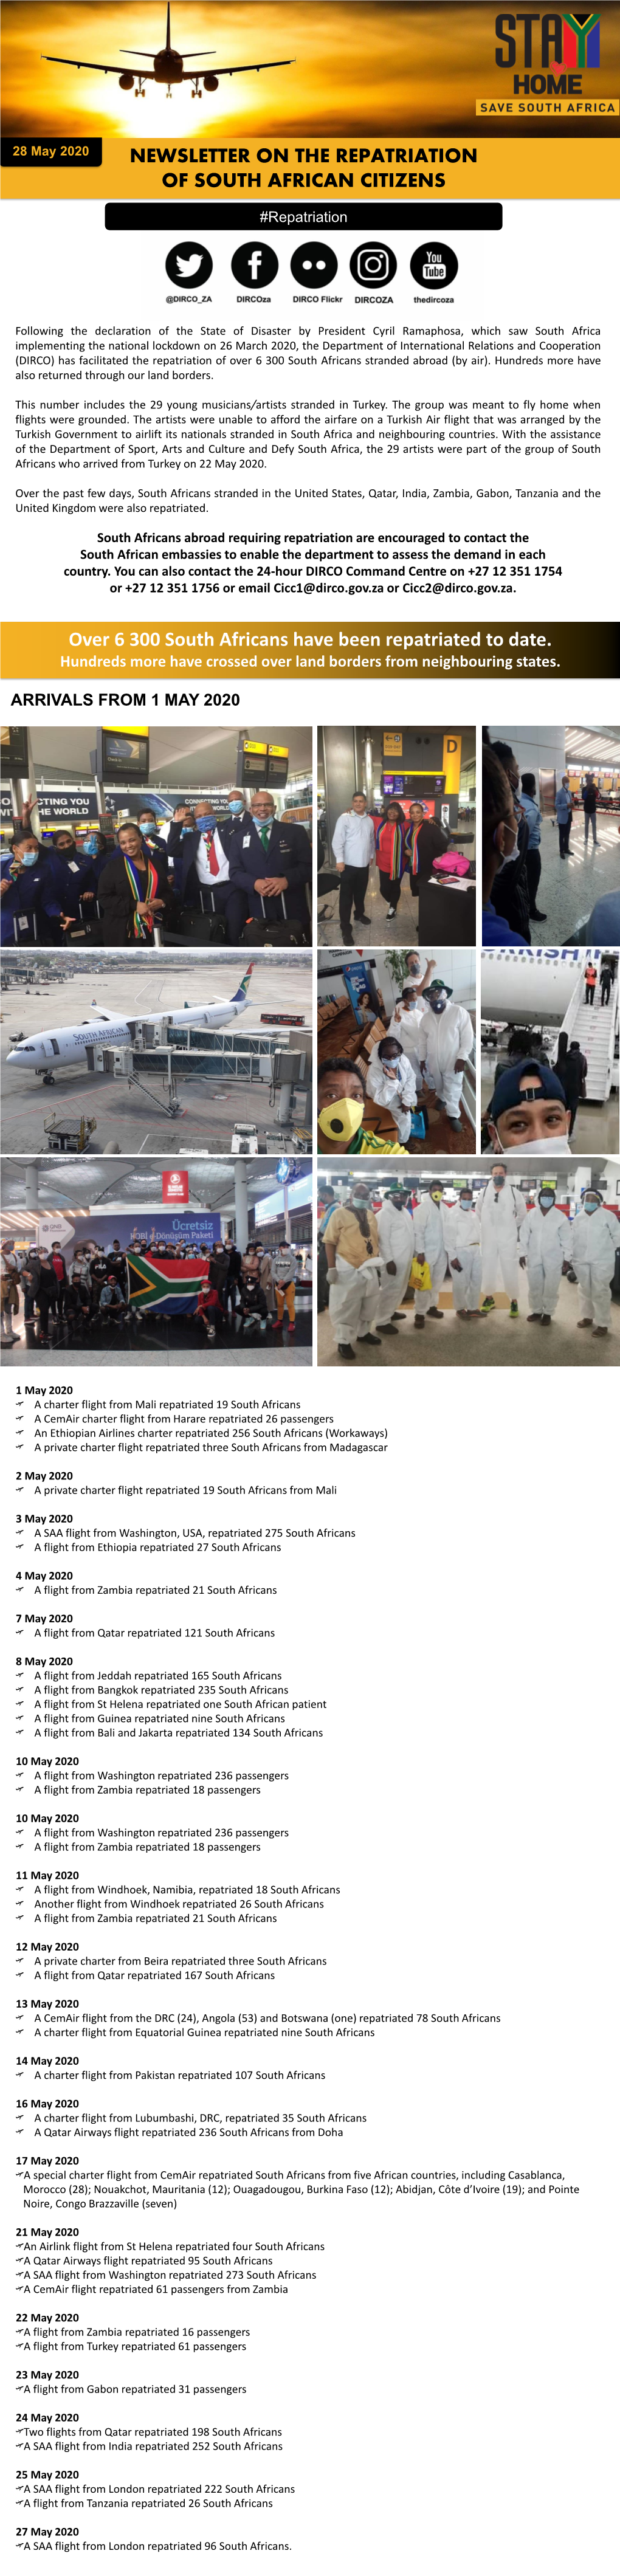 Newsletter on the Repatriation of South African Citizens